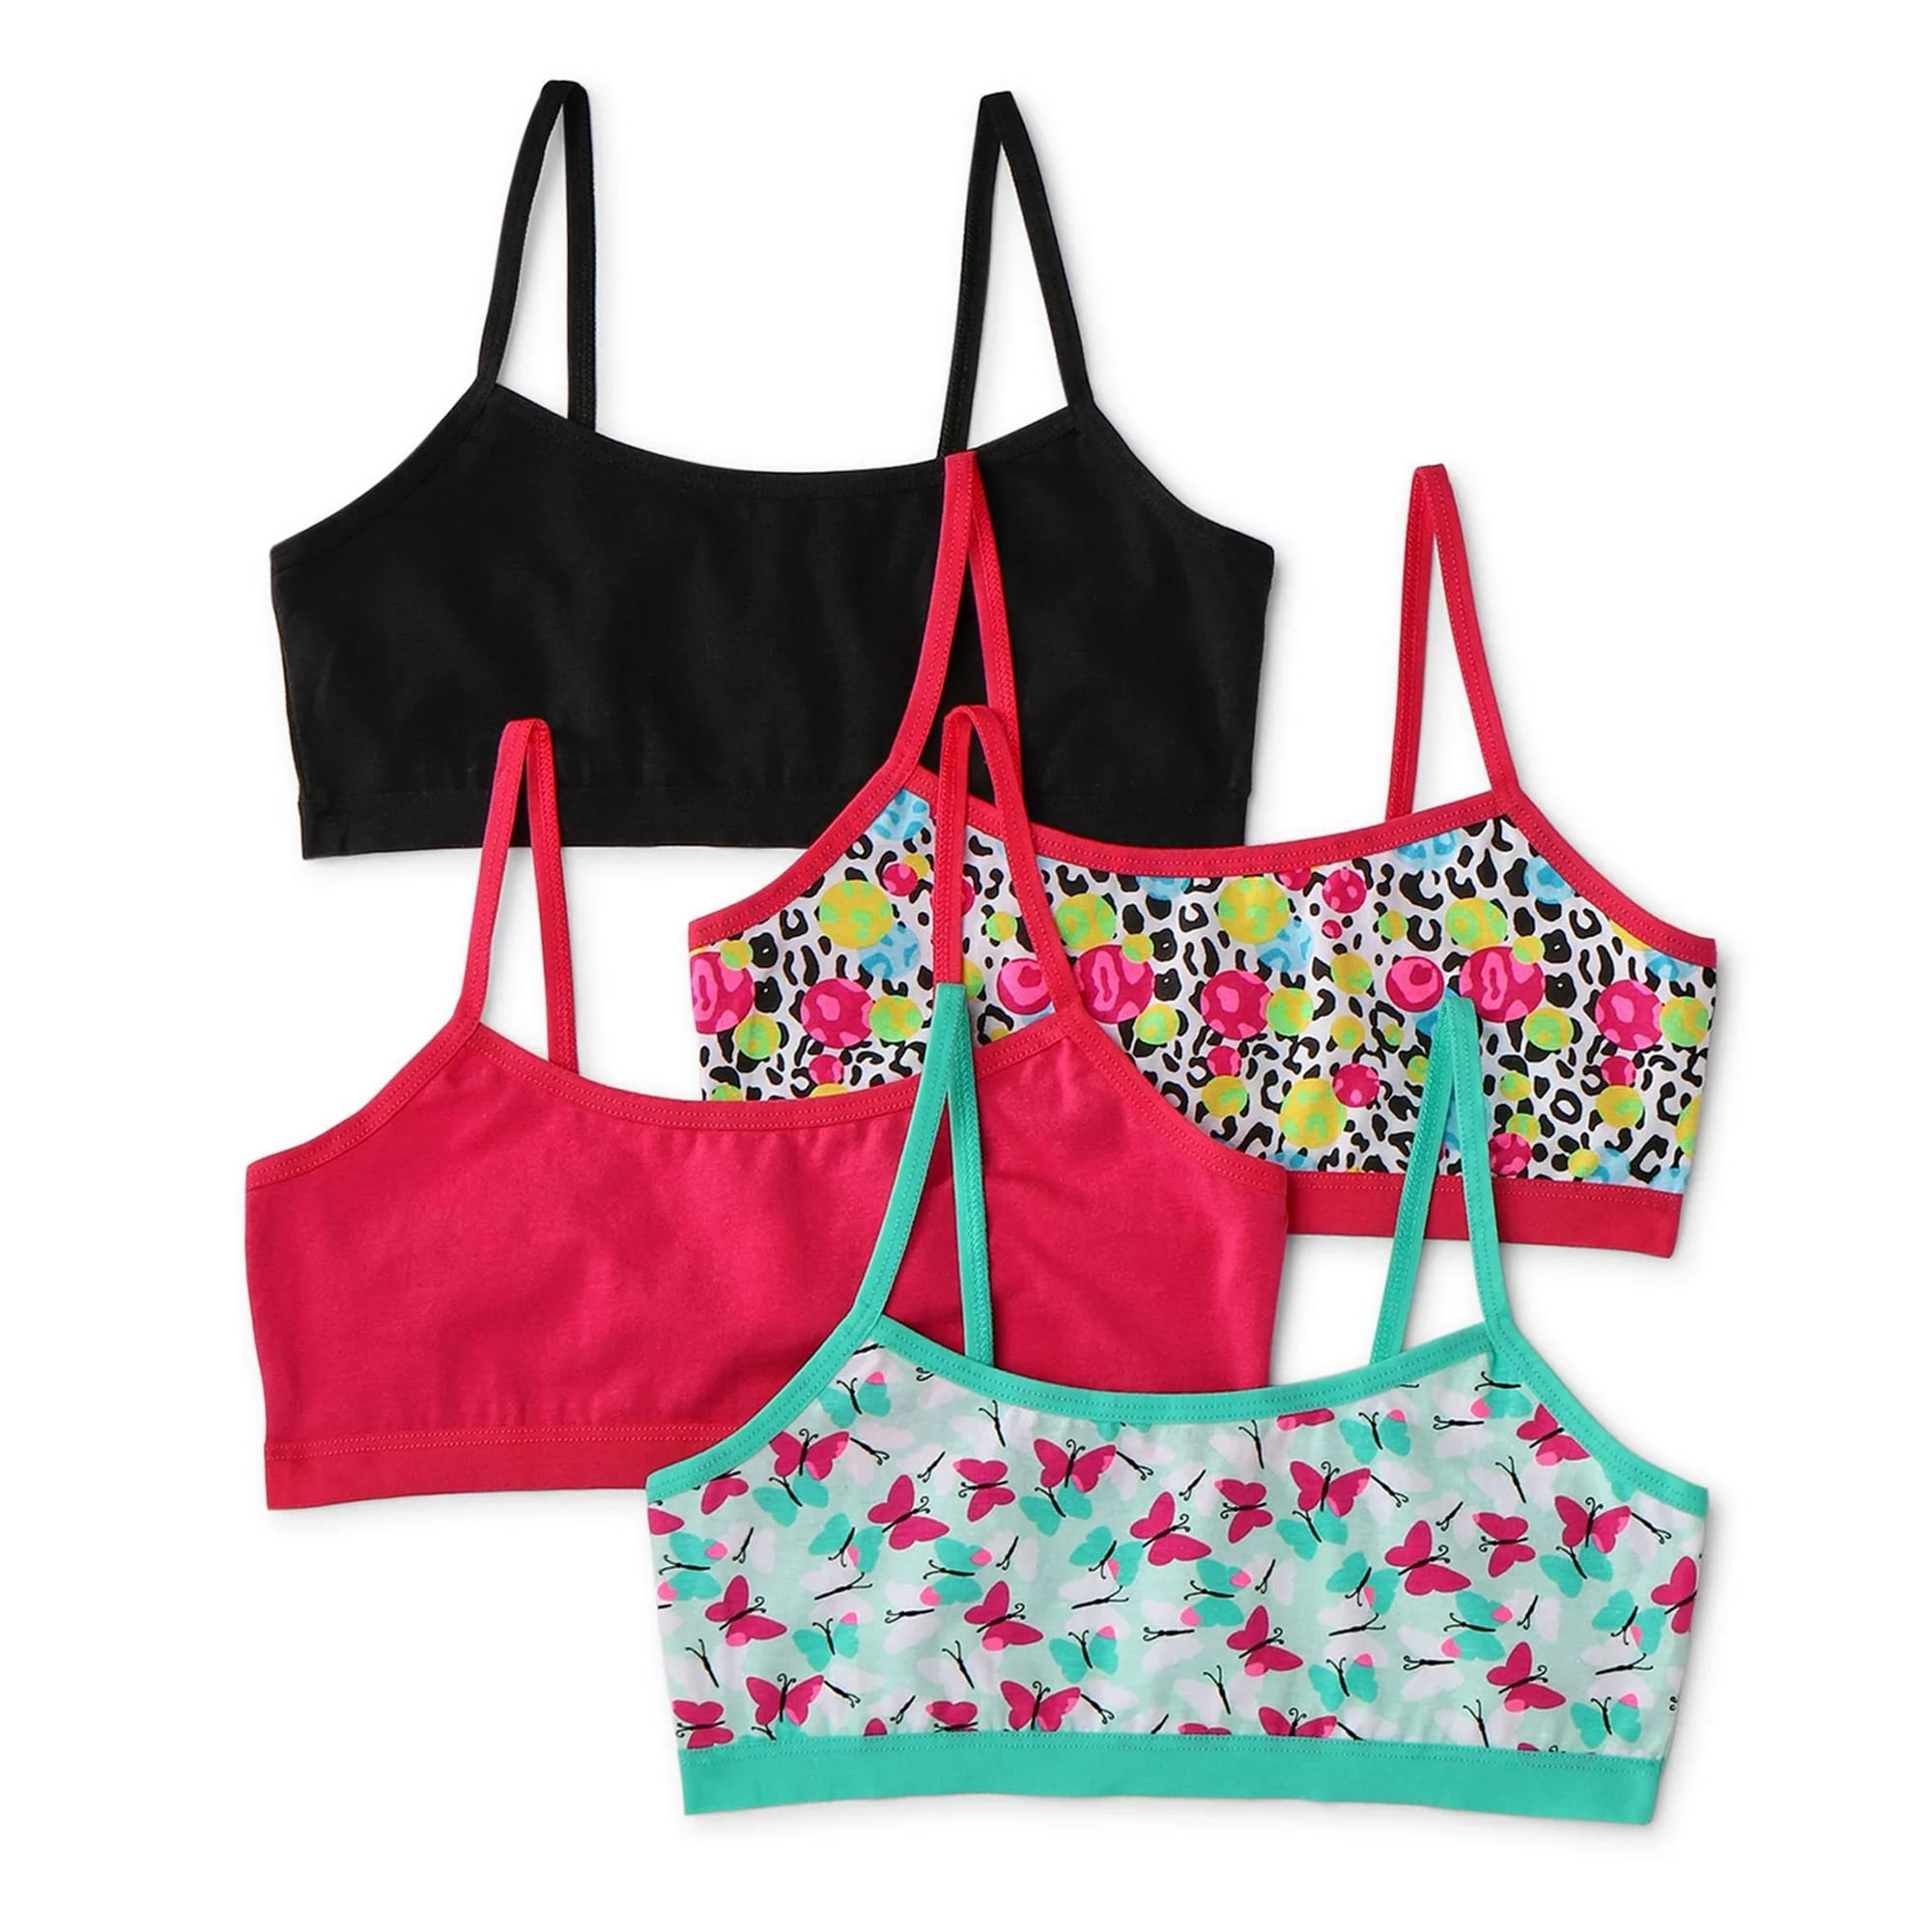 Chili Peppers Girls' Training Sports Bra with Adjustable Straps